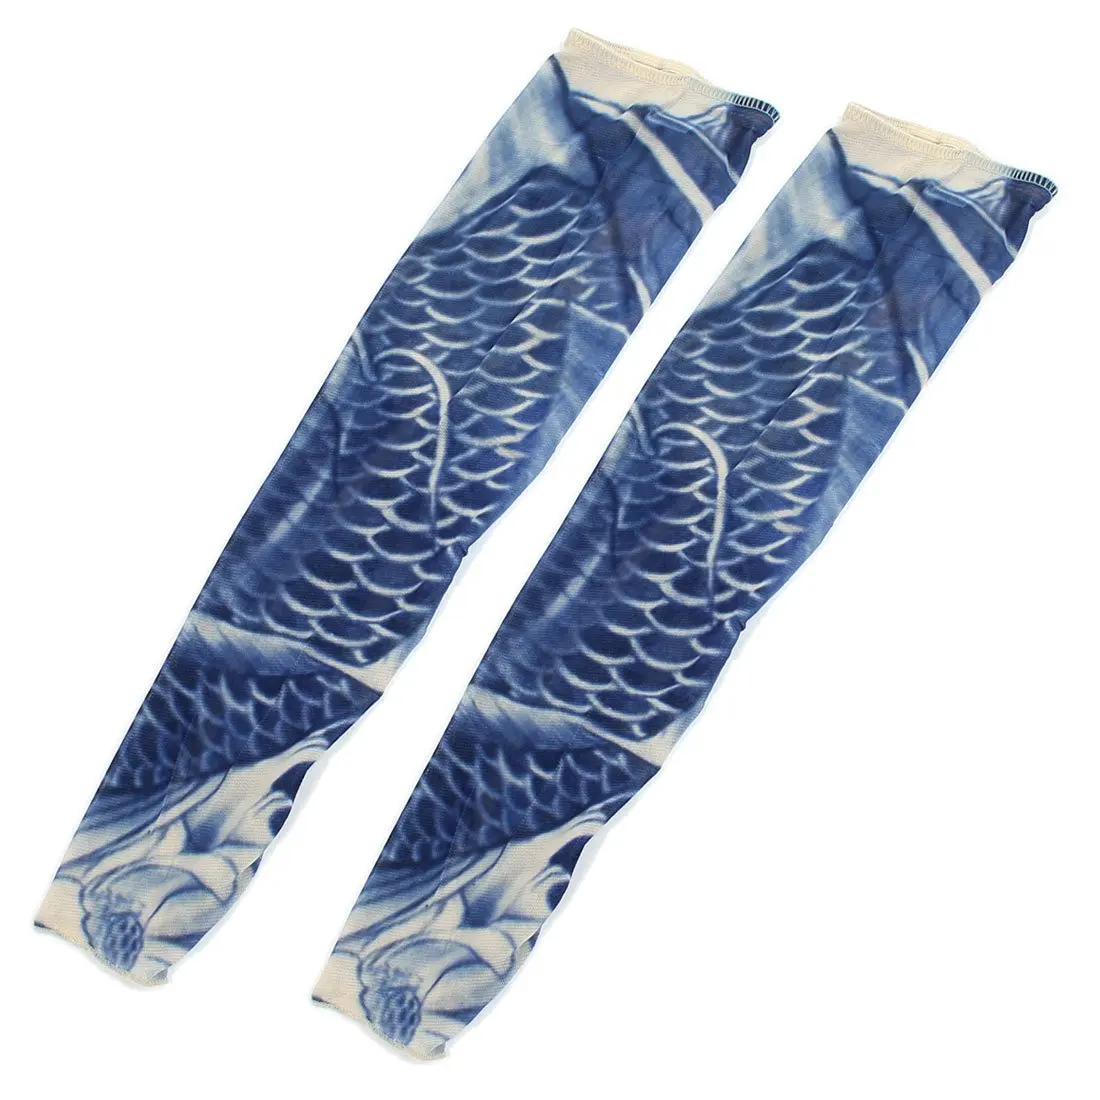 MYTL Fish Scale Print Fake Temporary Tattoo Cycling Arm Sleeves Pair Blue